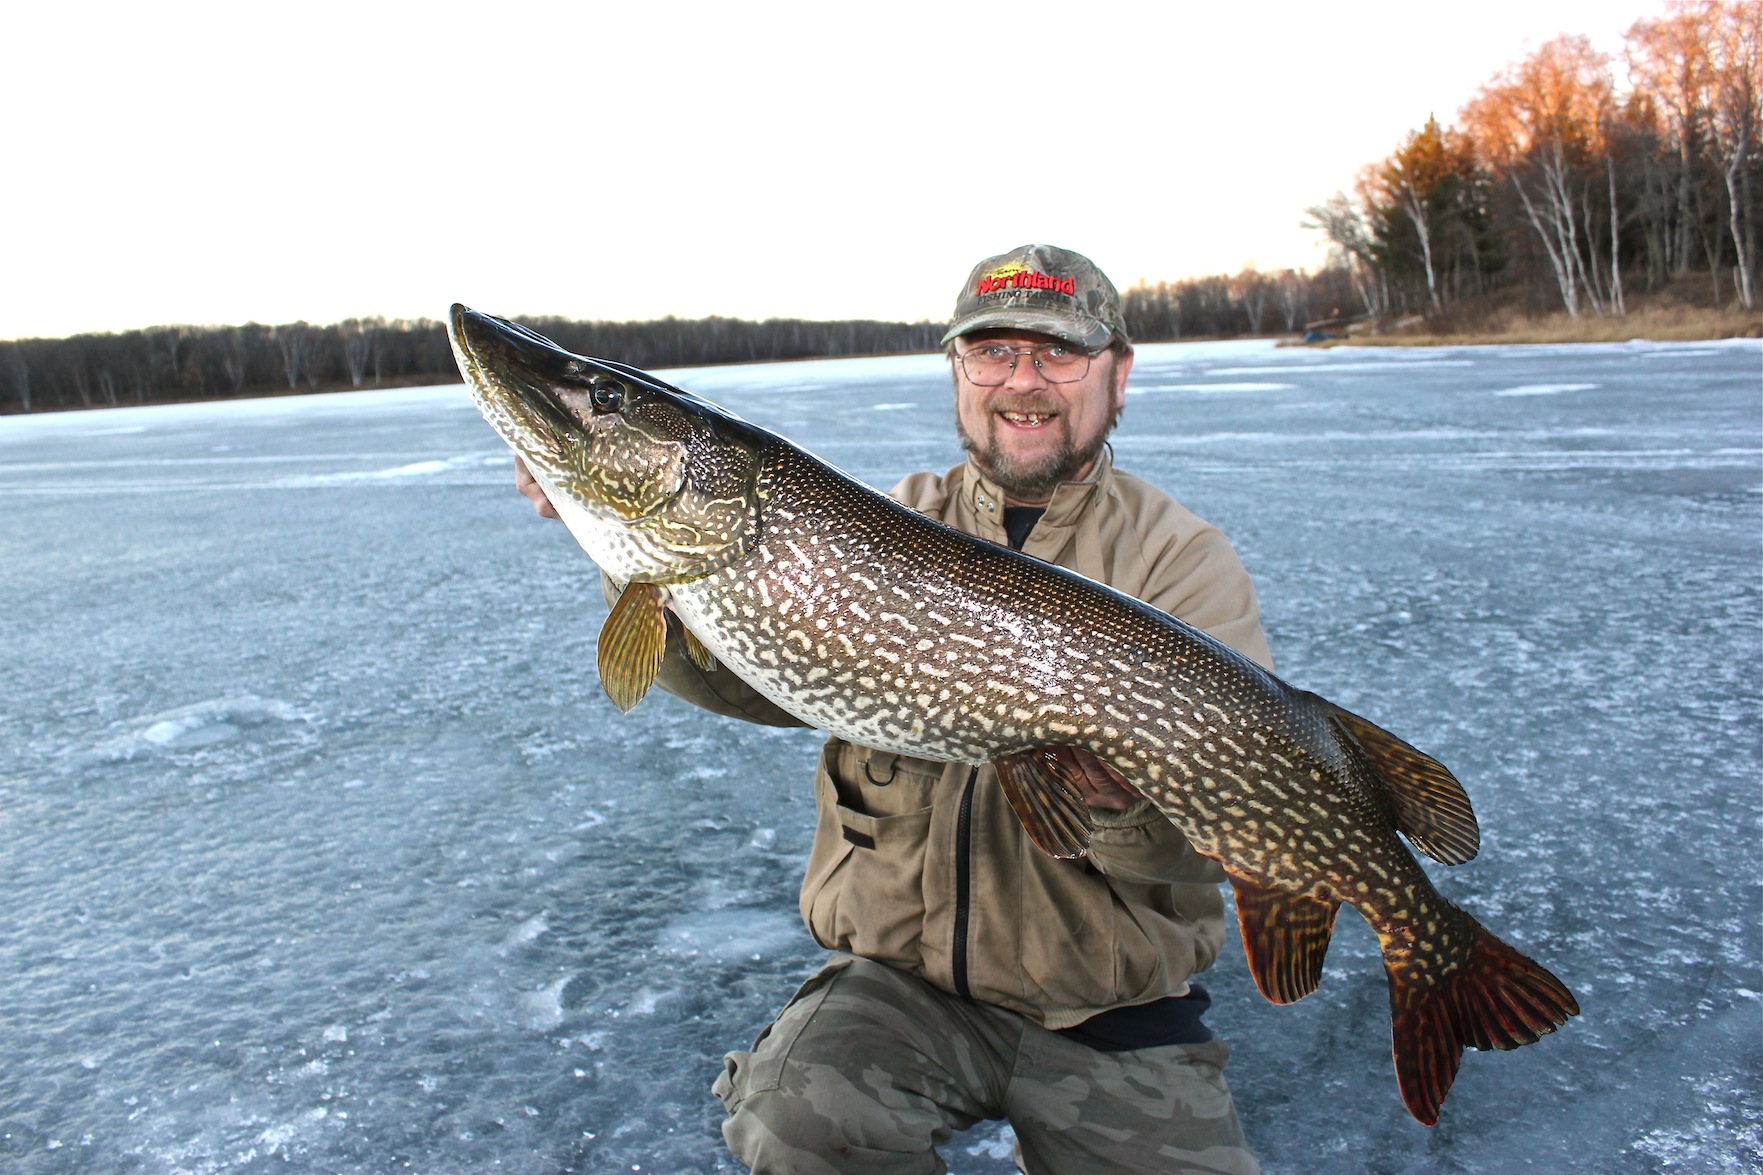 The Fifty Inch Pike